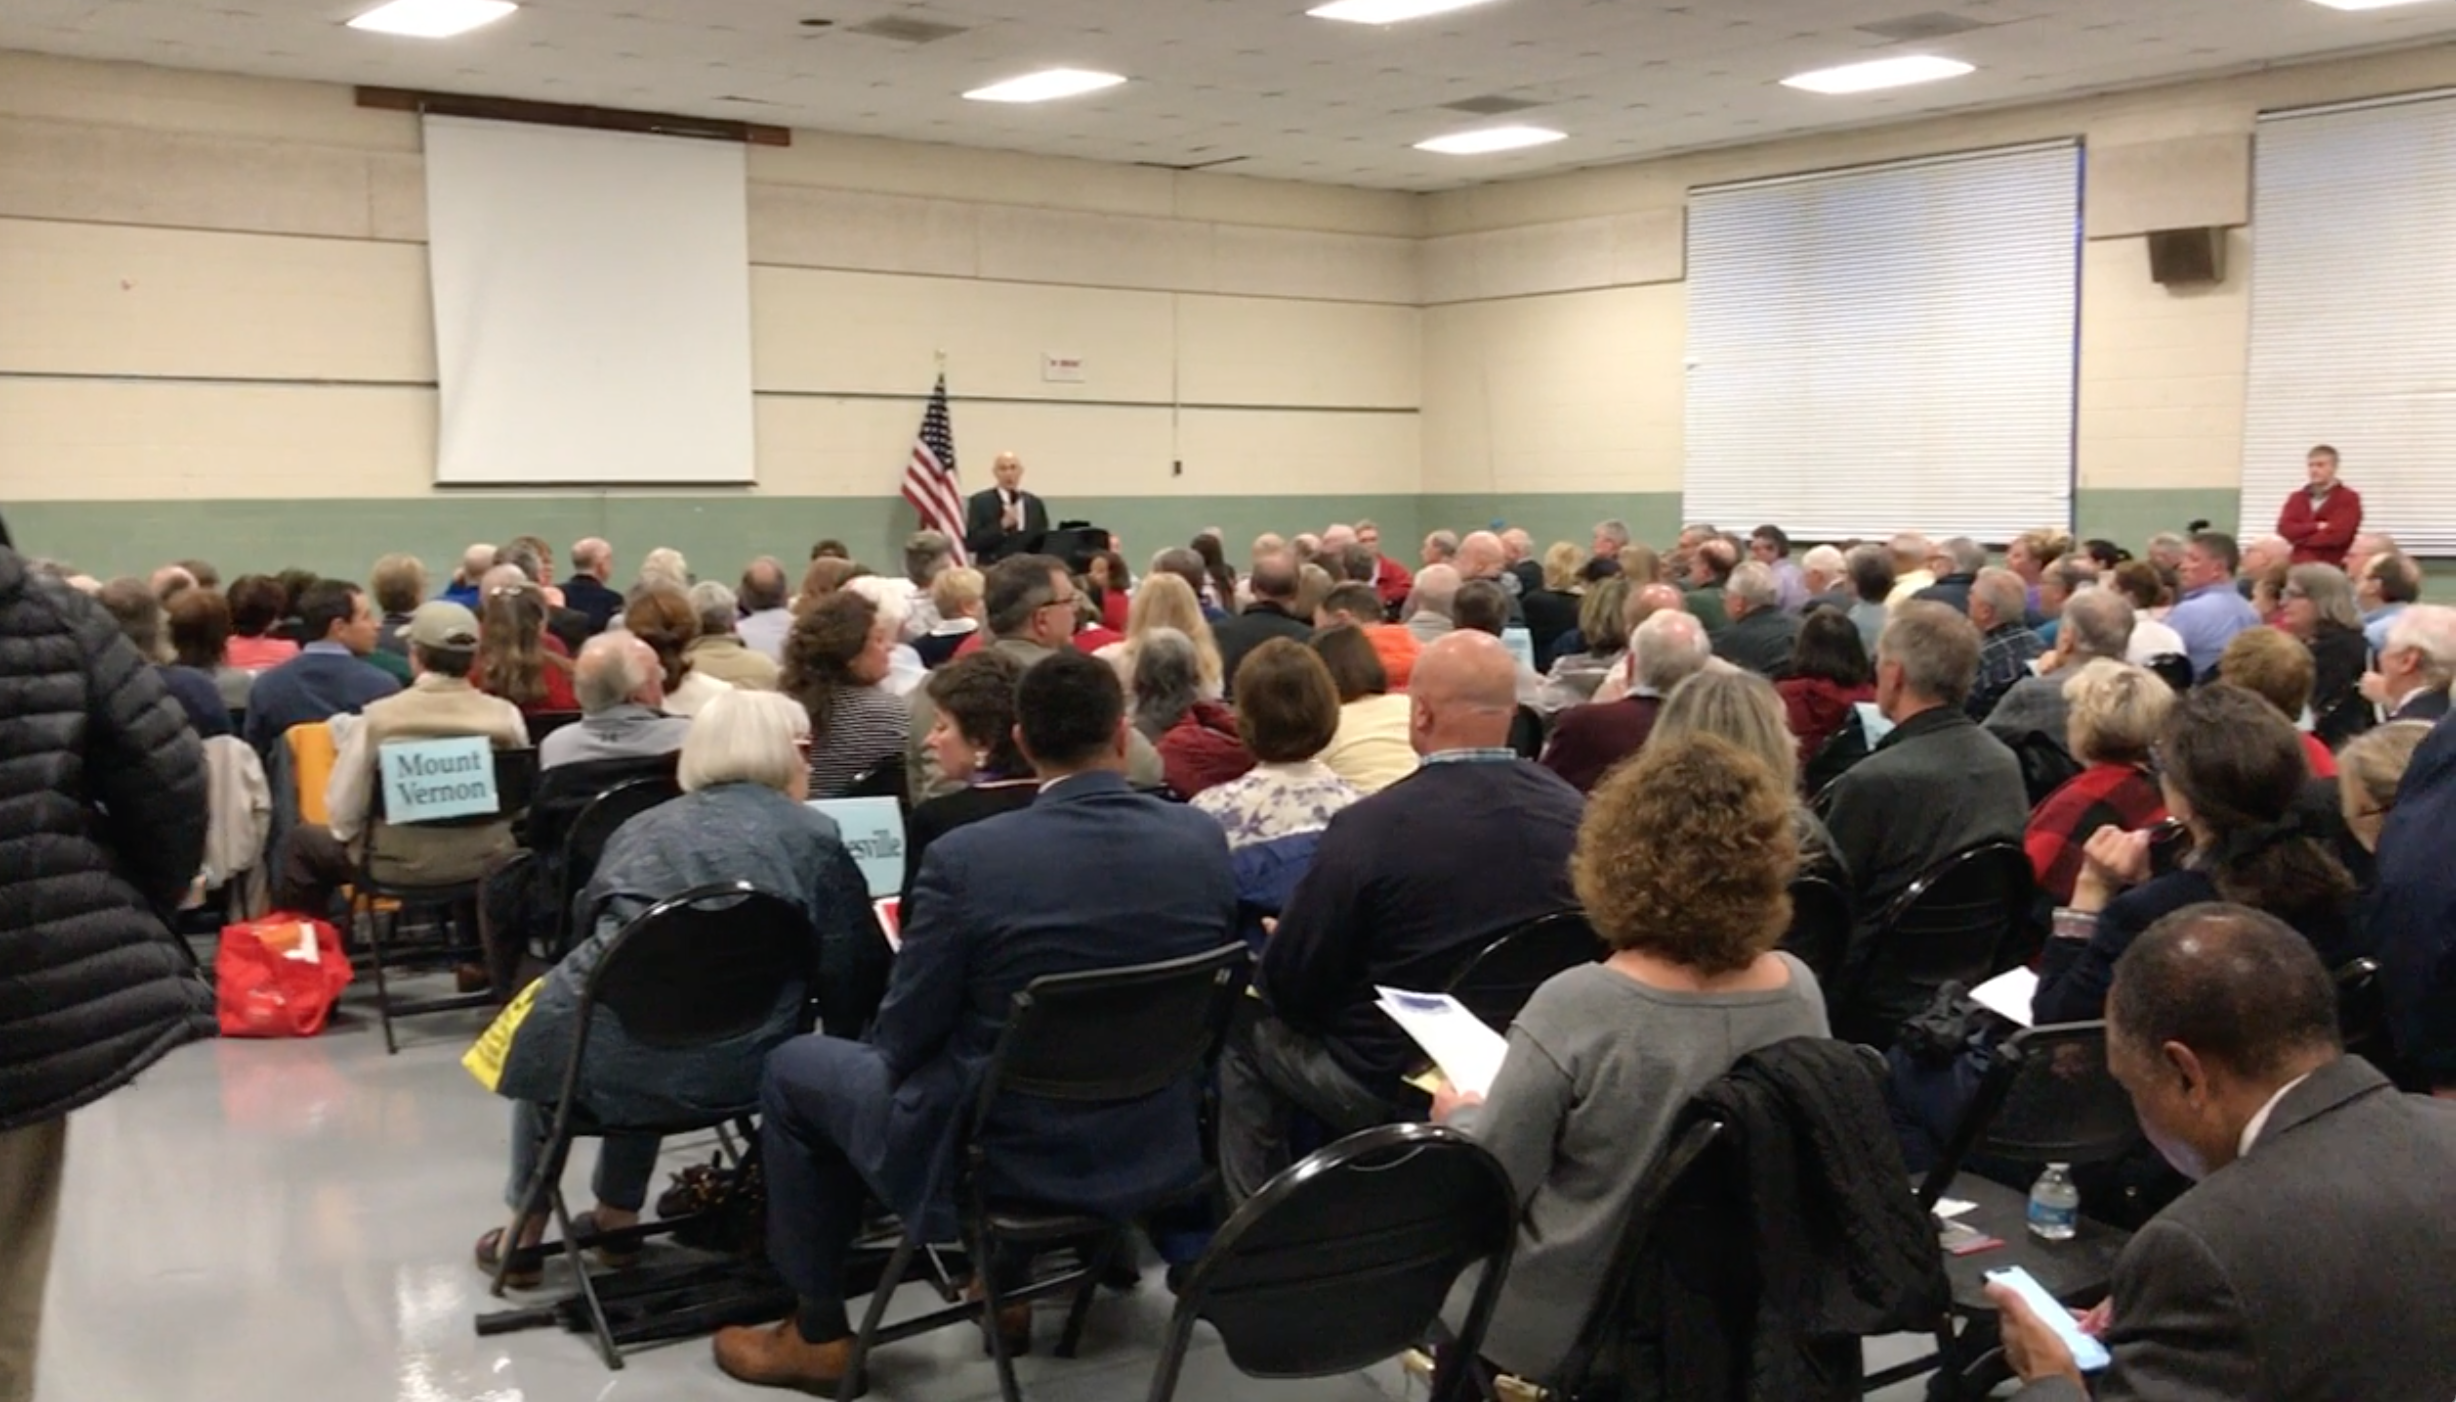 On April 24, the Fairfax County Republican Committee held its first membership meeting with chairman Tim Hannigan at the Green Acres Center.  Dozens of new members joined and the room was packed. As reported by the